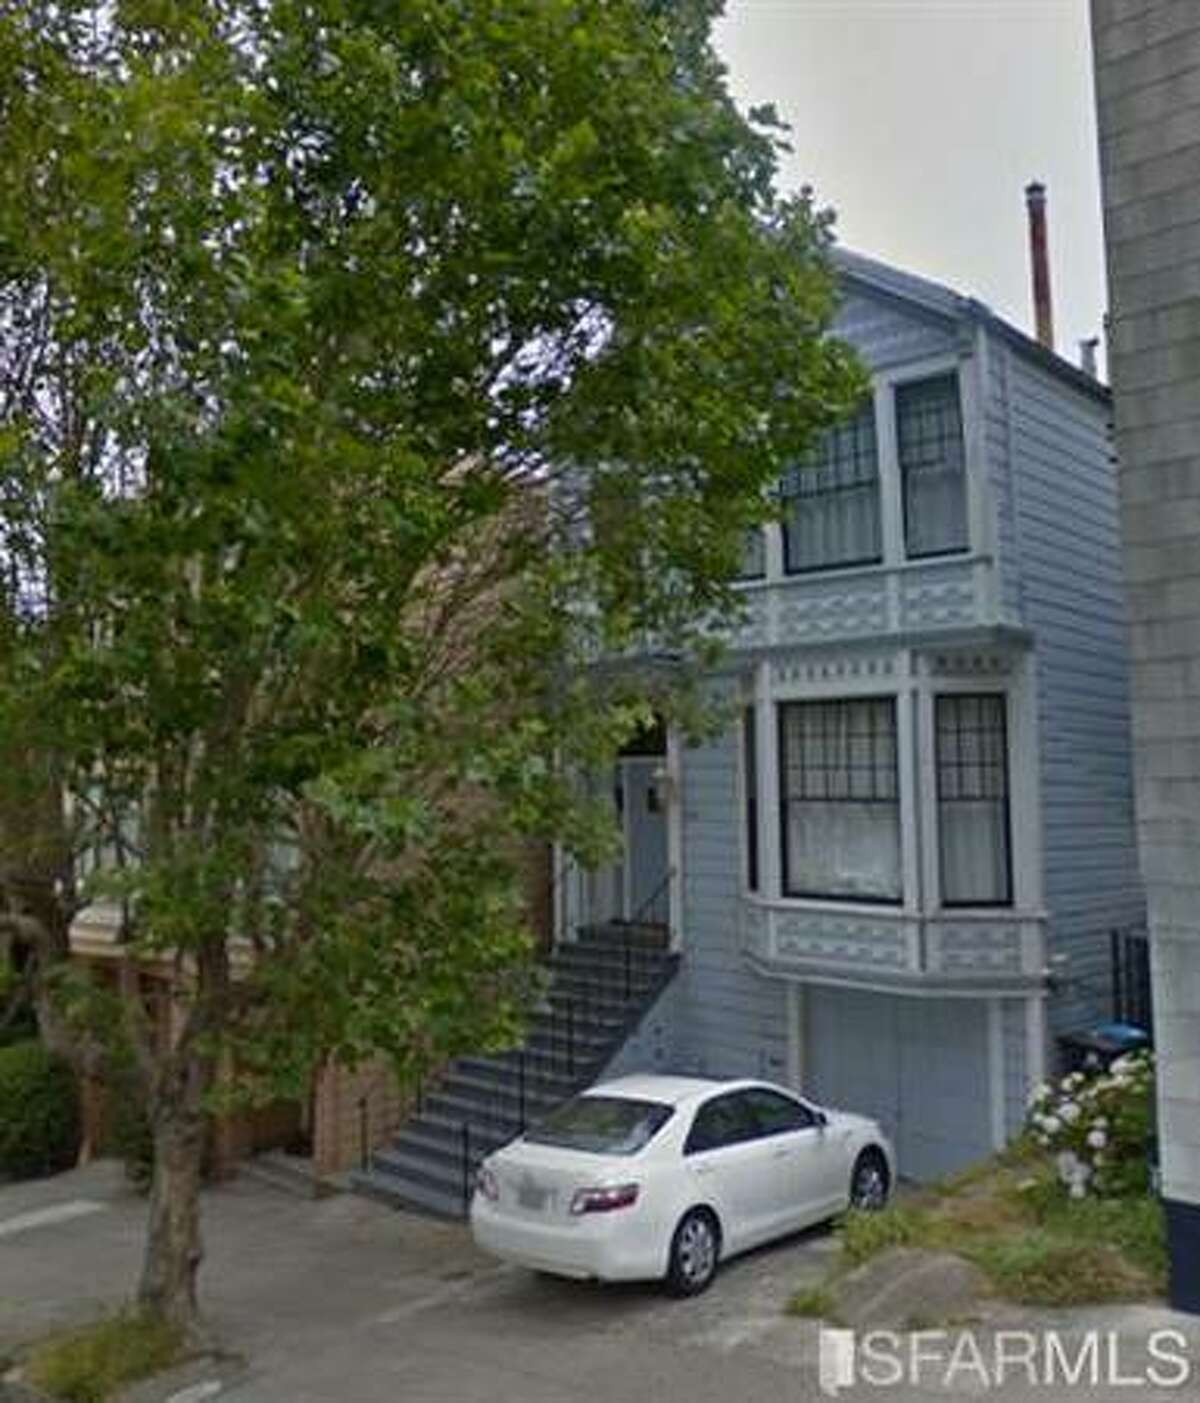 This 4 bed home in Cole Valley rents for $8,250 a month Rents up nationally, hardest for younger generations to afford.